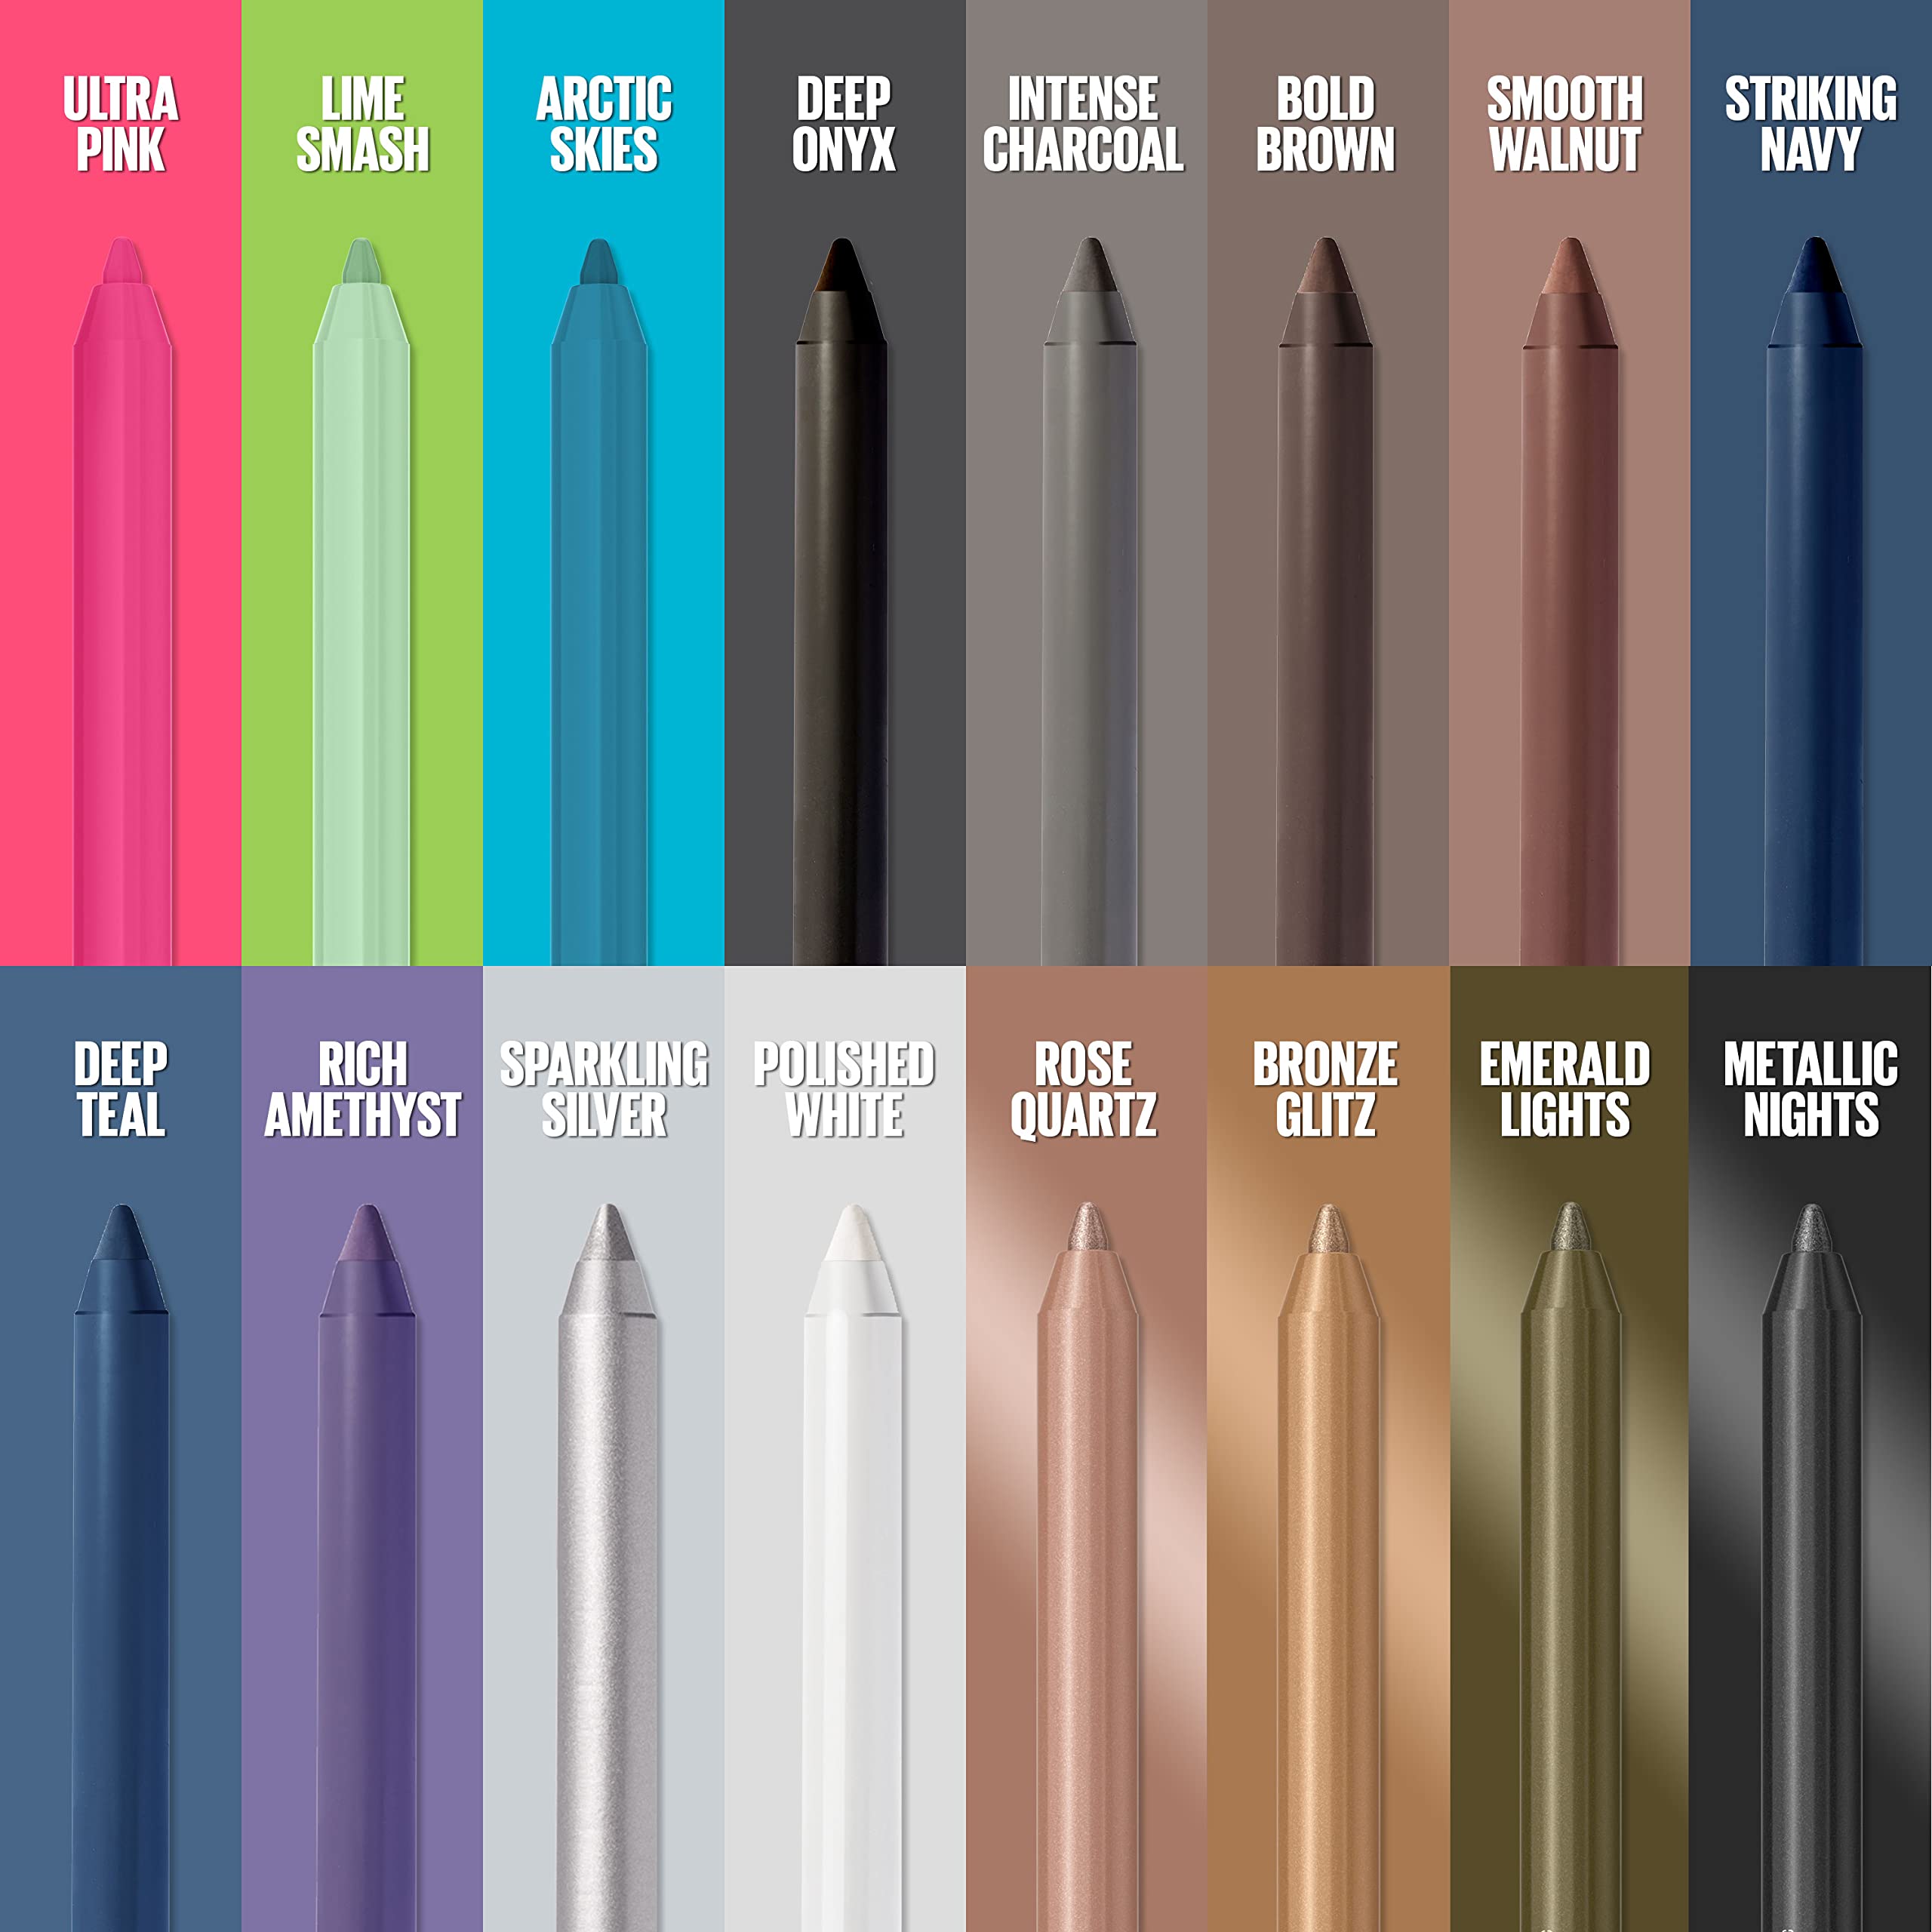 Maybelline New York TattooStudio Long-Lasting Sharpenable Eyeliner Pencil, Glide on Smooth Gel Pigments with 36 Hour Wear, Waterproof, Deep Onyx, 1 Count